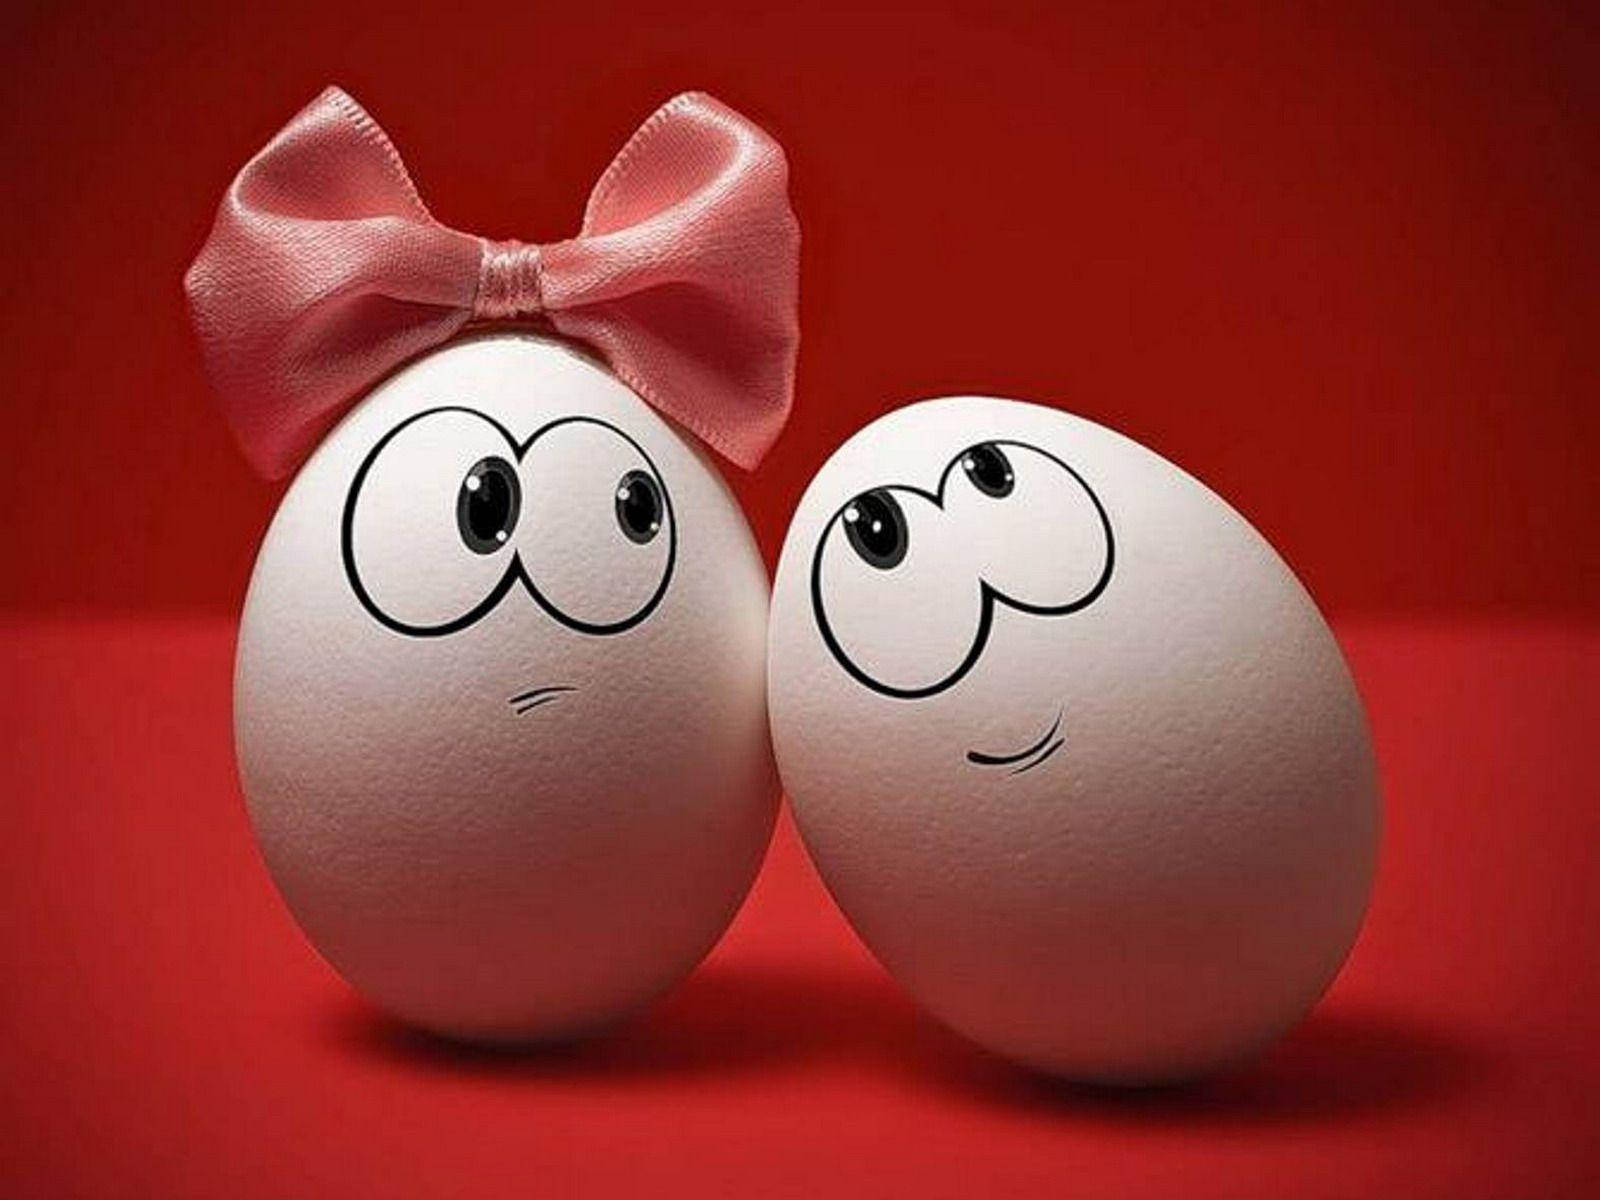 Couple Eggs Funny Laptop Background